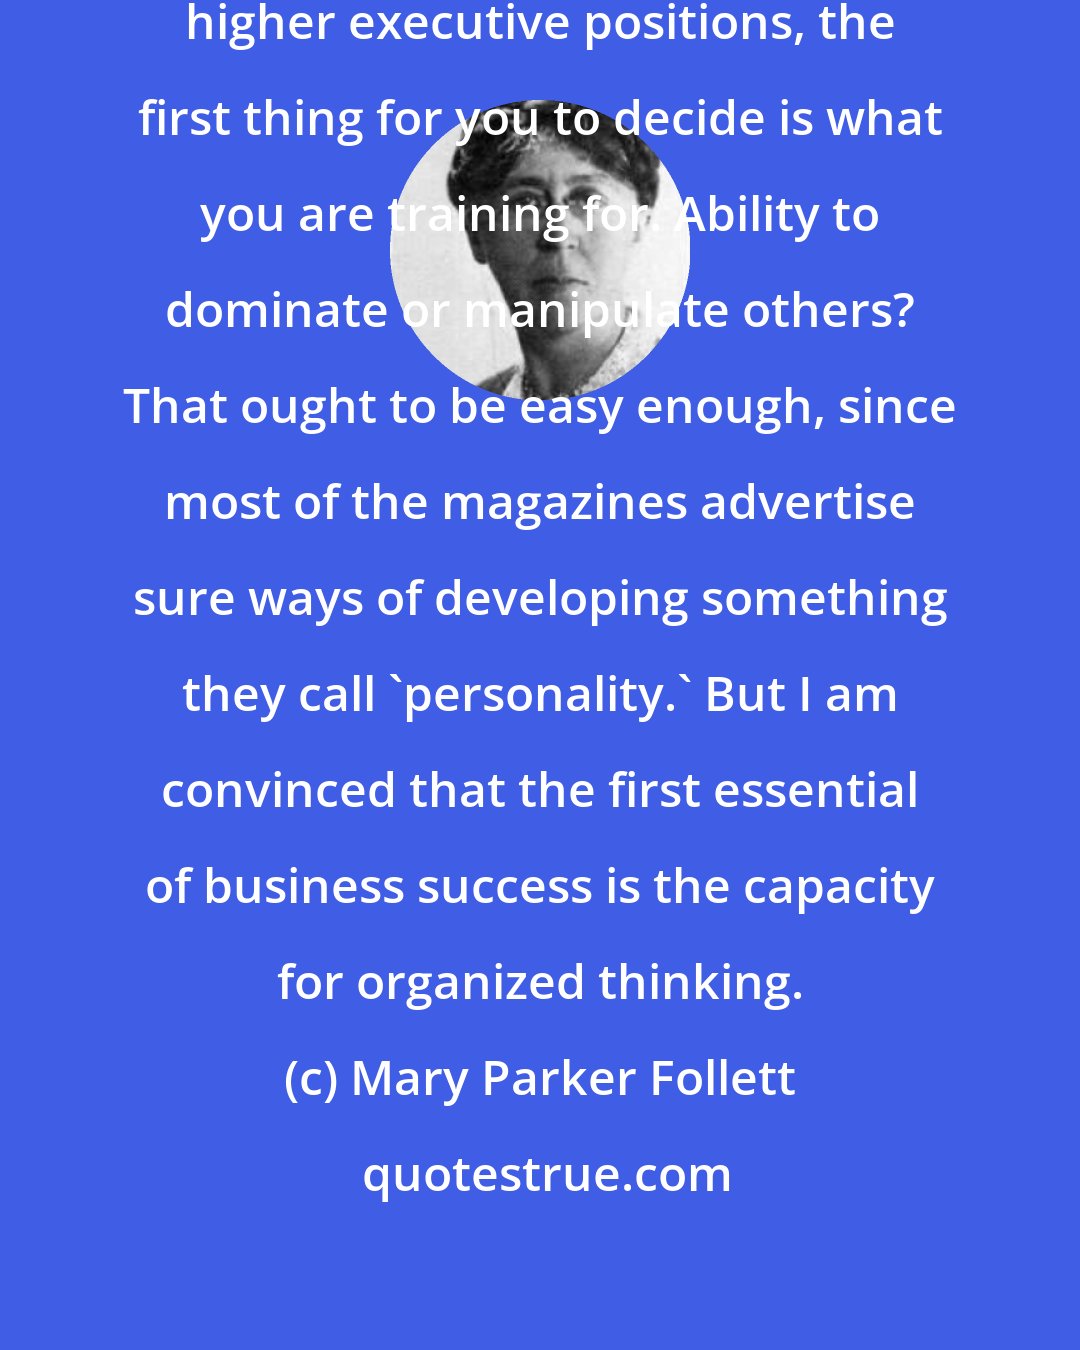 Mary Parker Follett: if you wish to train yourself for higher executive positions, the first thing for you to decide is what you are training for. Ability to dominate or manipulate others? That ought to be easy enough, since most of the magazines advertise sure ways of developing something they call 'personality.' But I am convinced that the first essential of business success is the capacity for organized thinking.